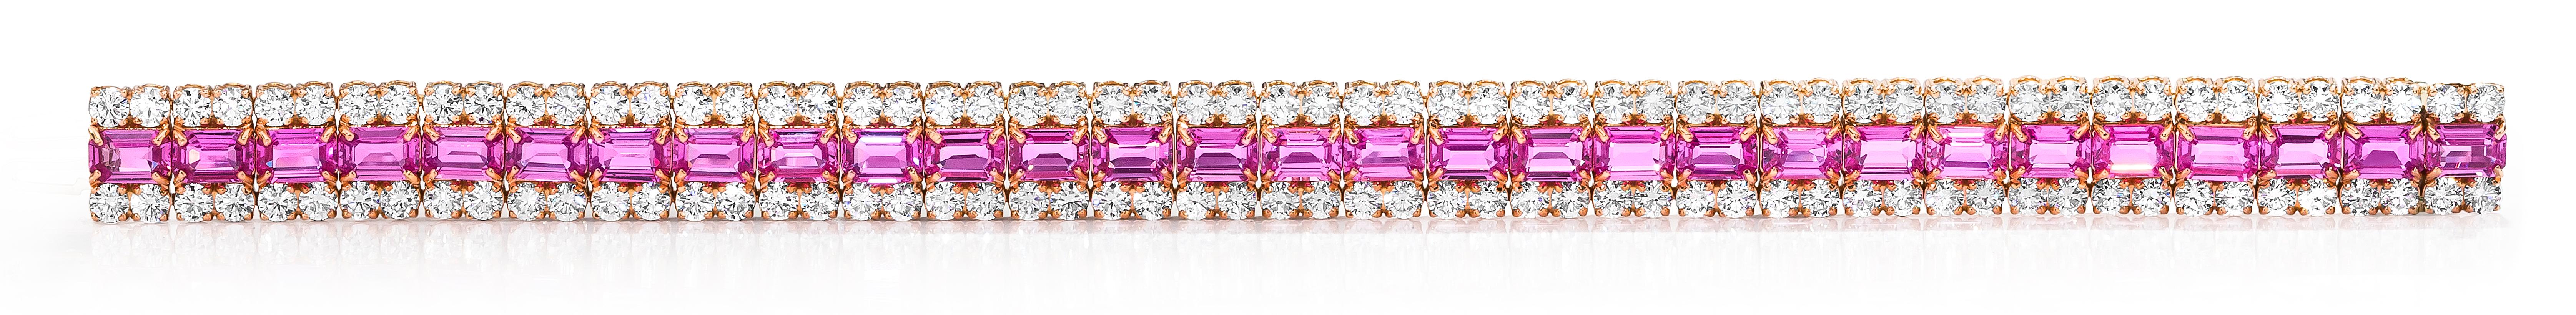 Magnificent Emerald Cut Pink Sapphire and Diamond Bracelet.

28 Emerald Cut Pink Sapphire weighing 17.27 Carats.
112 Round Diamonds weighing 7.84 Carats.
Set in 18 Karat Rose Gold.